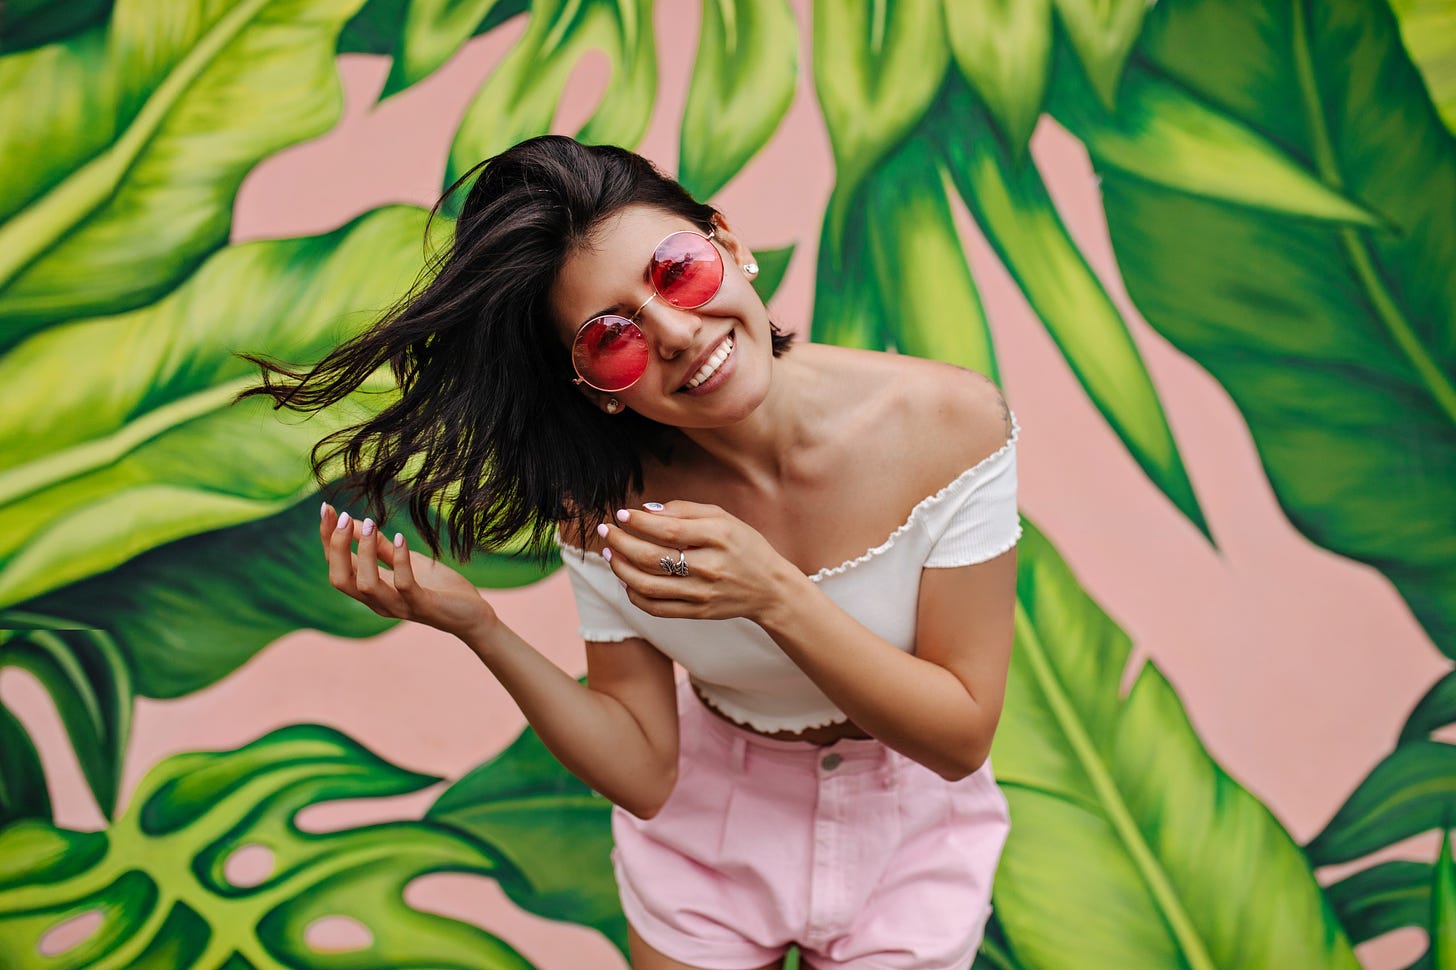 A woman in bright colors (and dark hair) smiles and poses against a painted pink and green background.